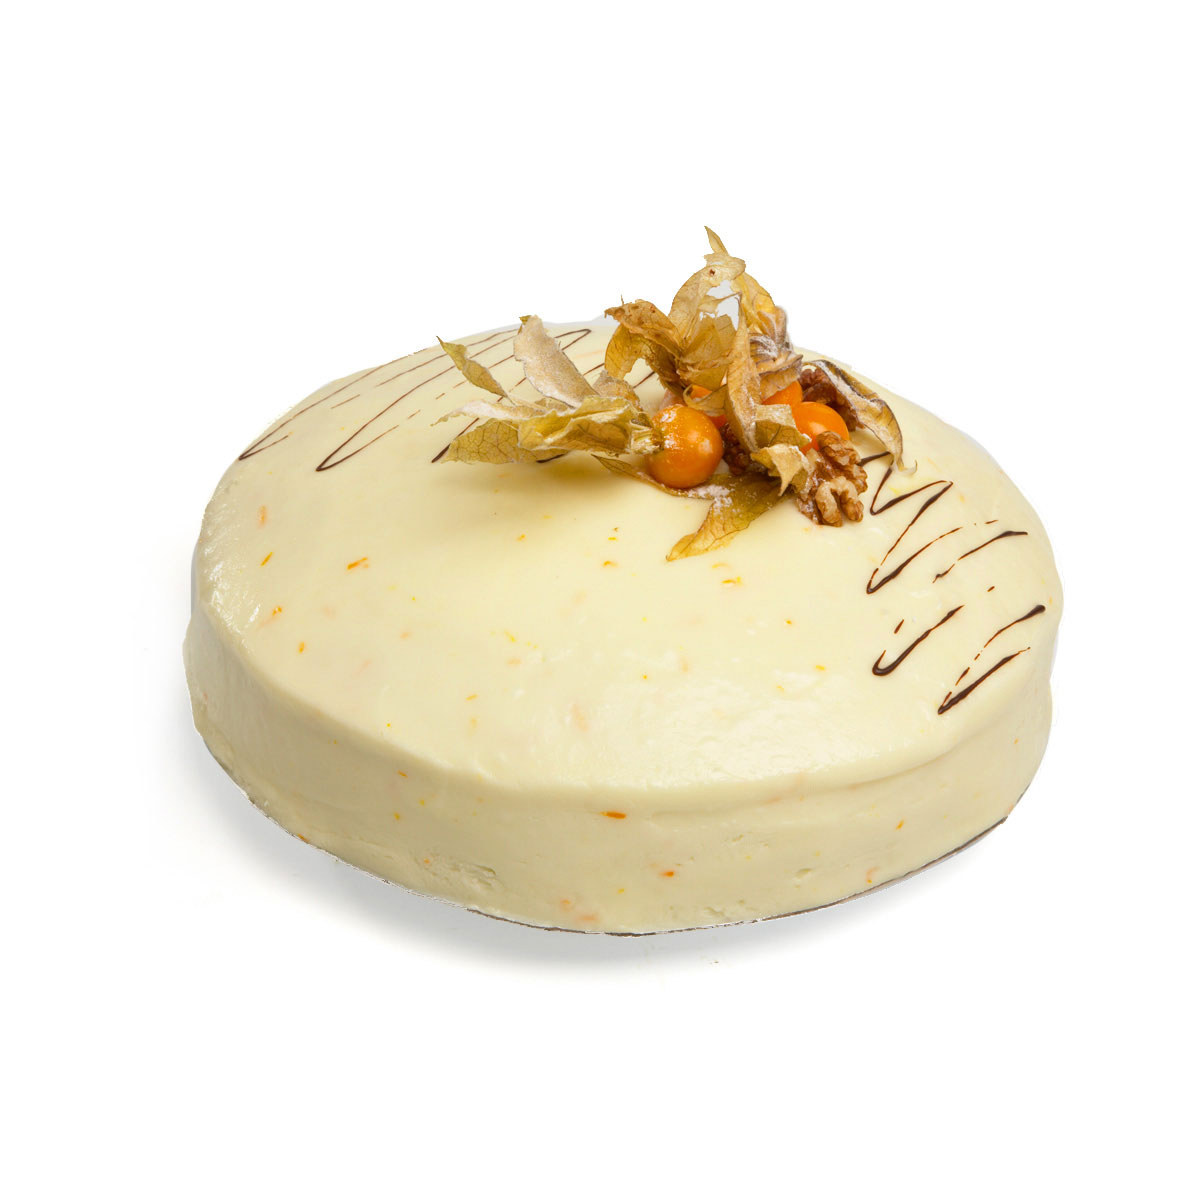 6ins Organic Carrot Cake-Local Delivery/Collection | The Jolliffe Cake Co